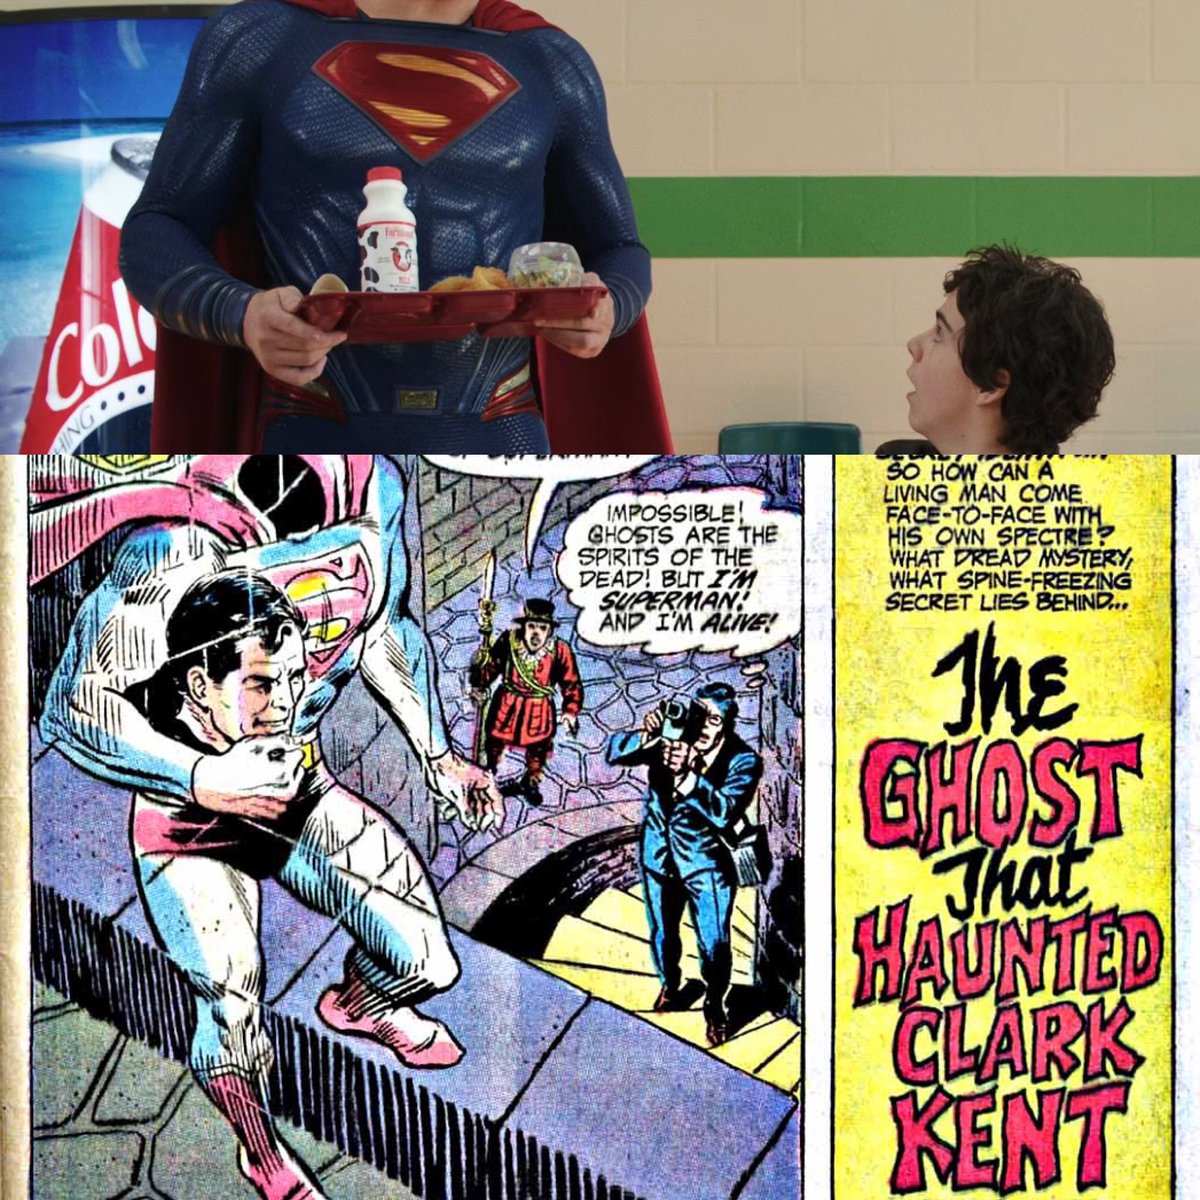 So that’s who really appeared at the end of the first Shazam movie #shazam #superman #dceu #captainmarvel #snyderverse #zacharylevi #henrycavill #dcu #superhero #captainmarveljr #freddiefreeman #headless #ghost #creepy #cameo #dcuniverse #movie #spectre #justiceleague #author